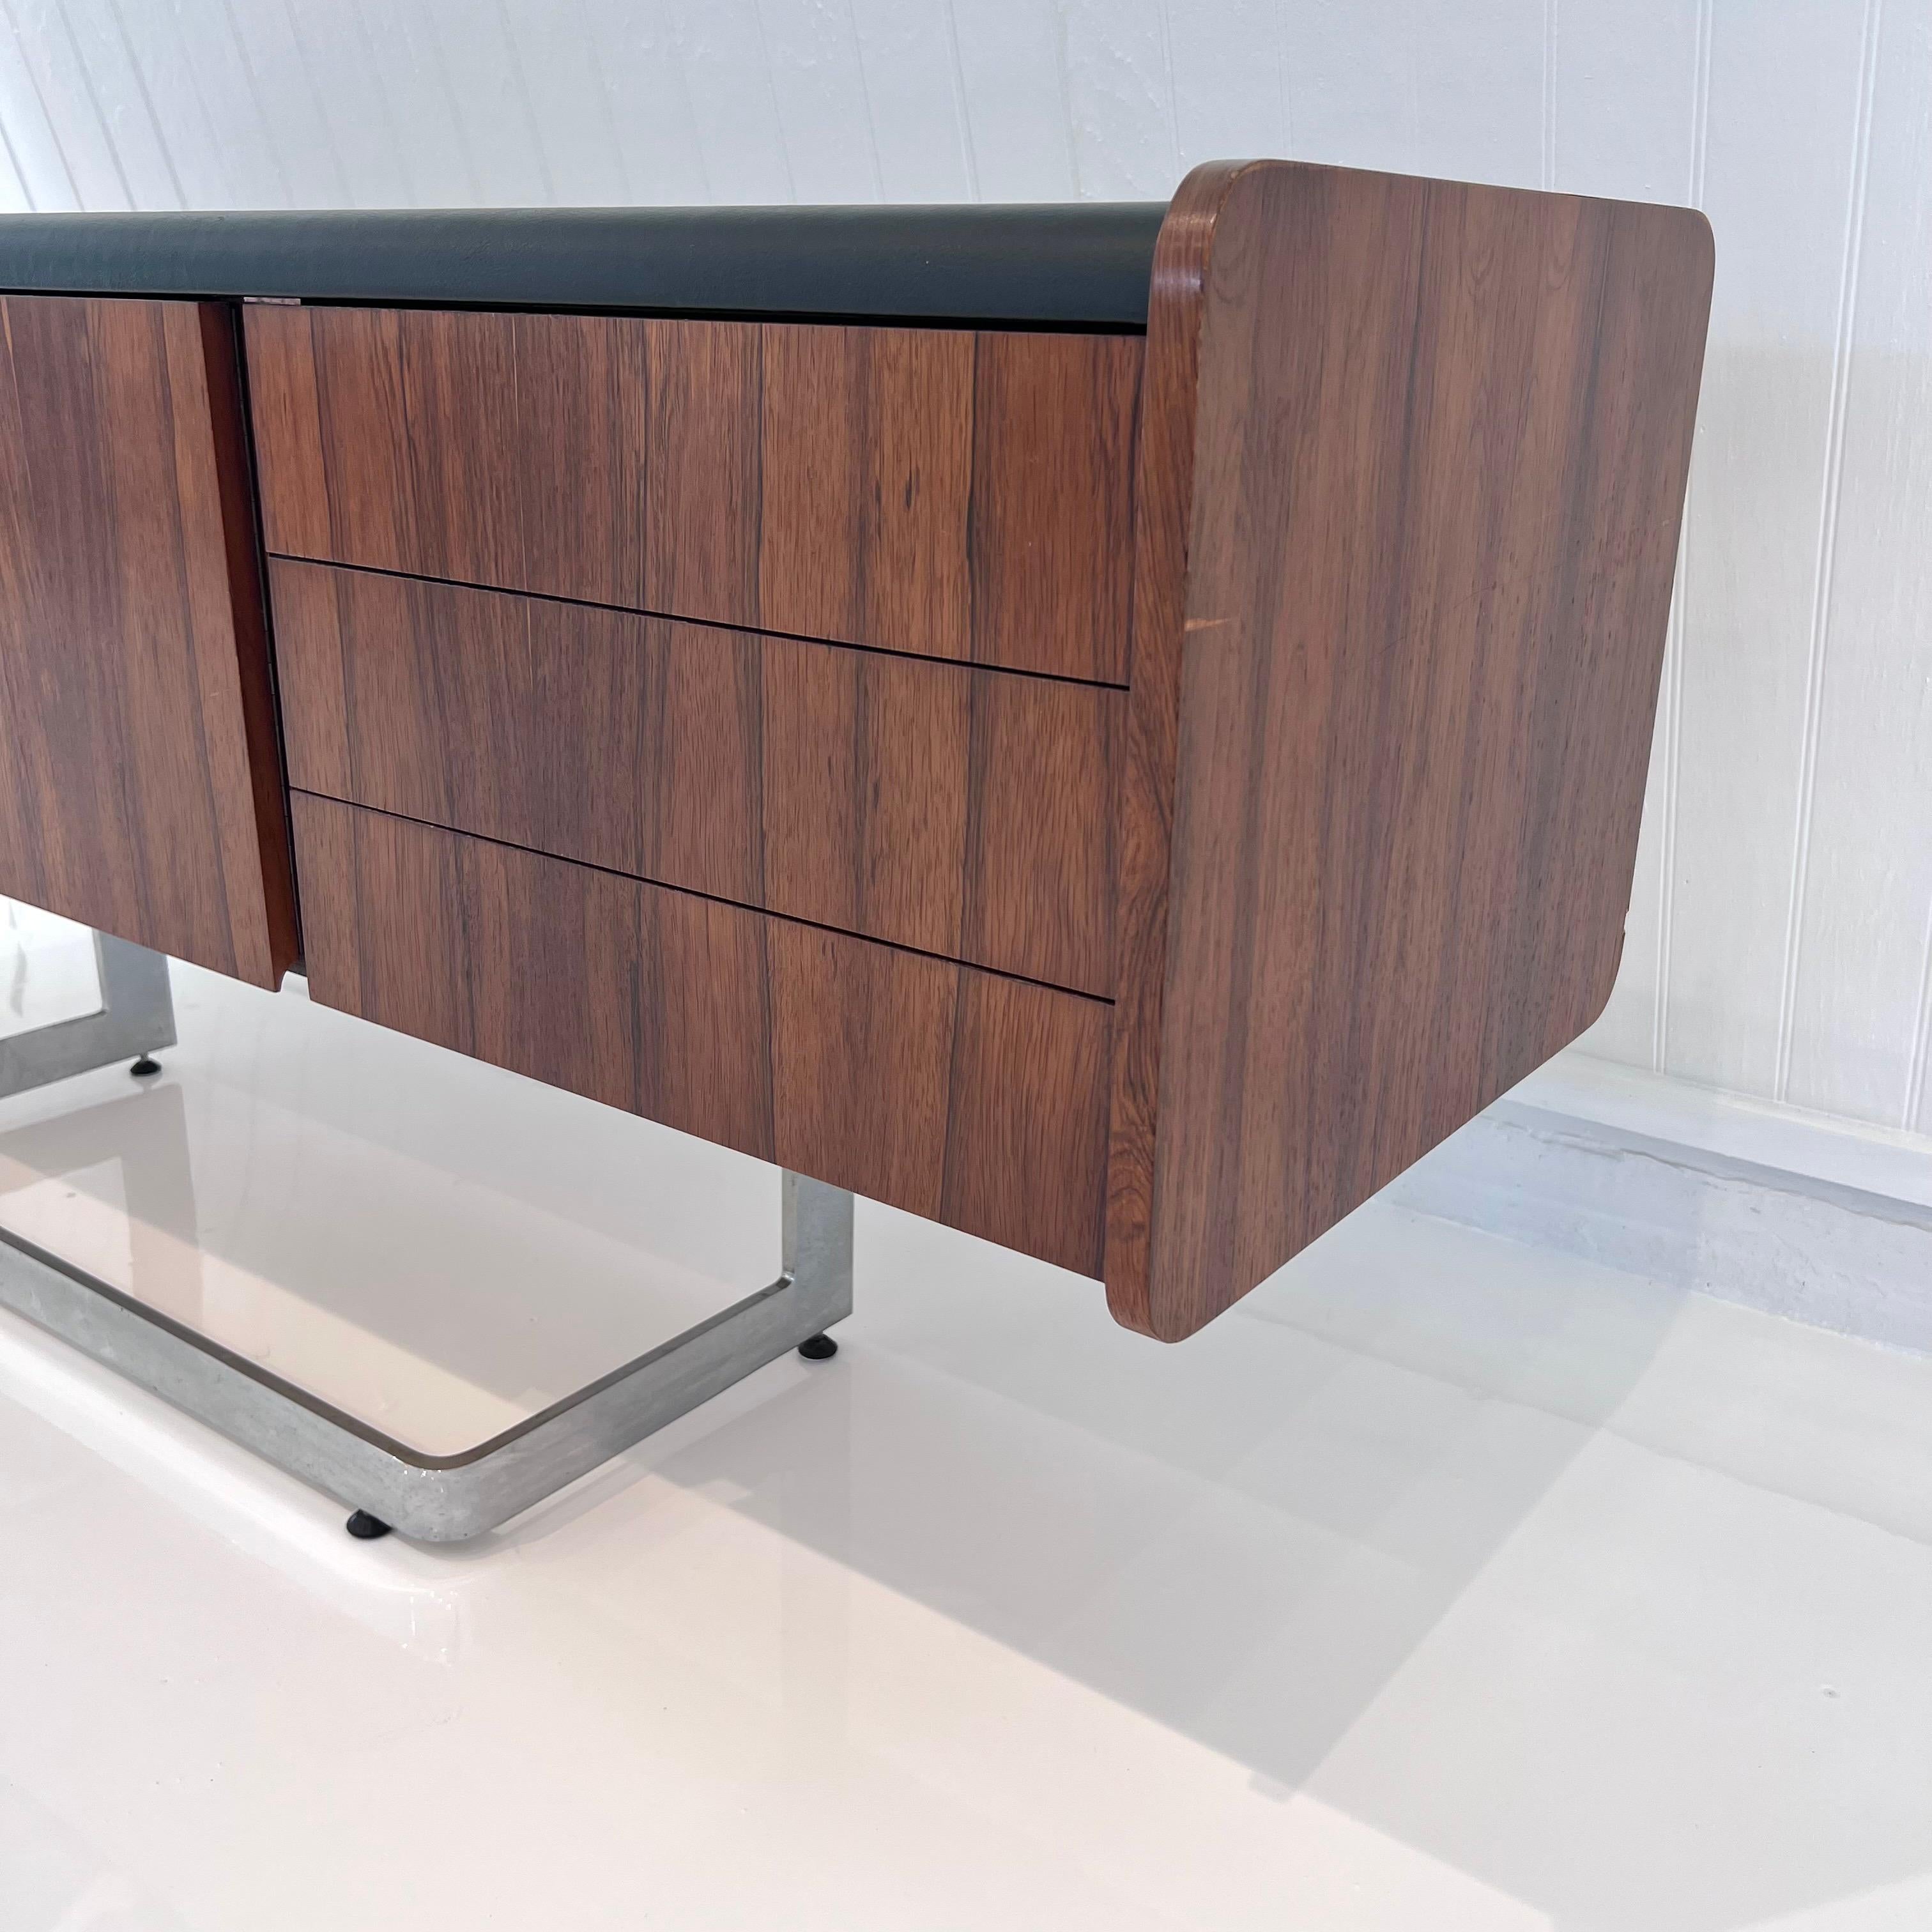 Late 20th Century Rosewood and Chrome Floating Credenza by Ste. Marie & Laurent, 1970s Canada